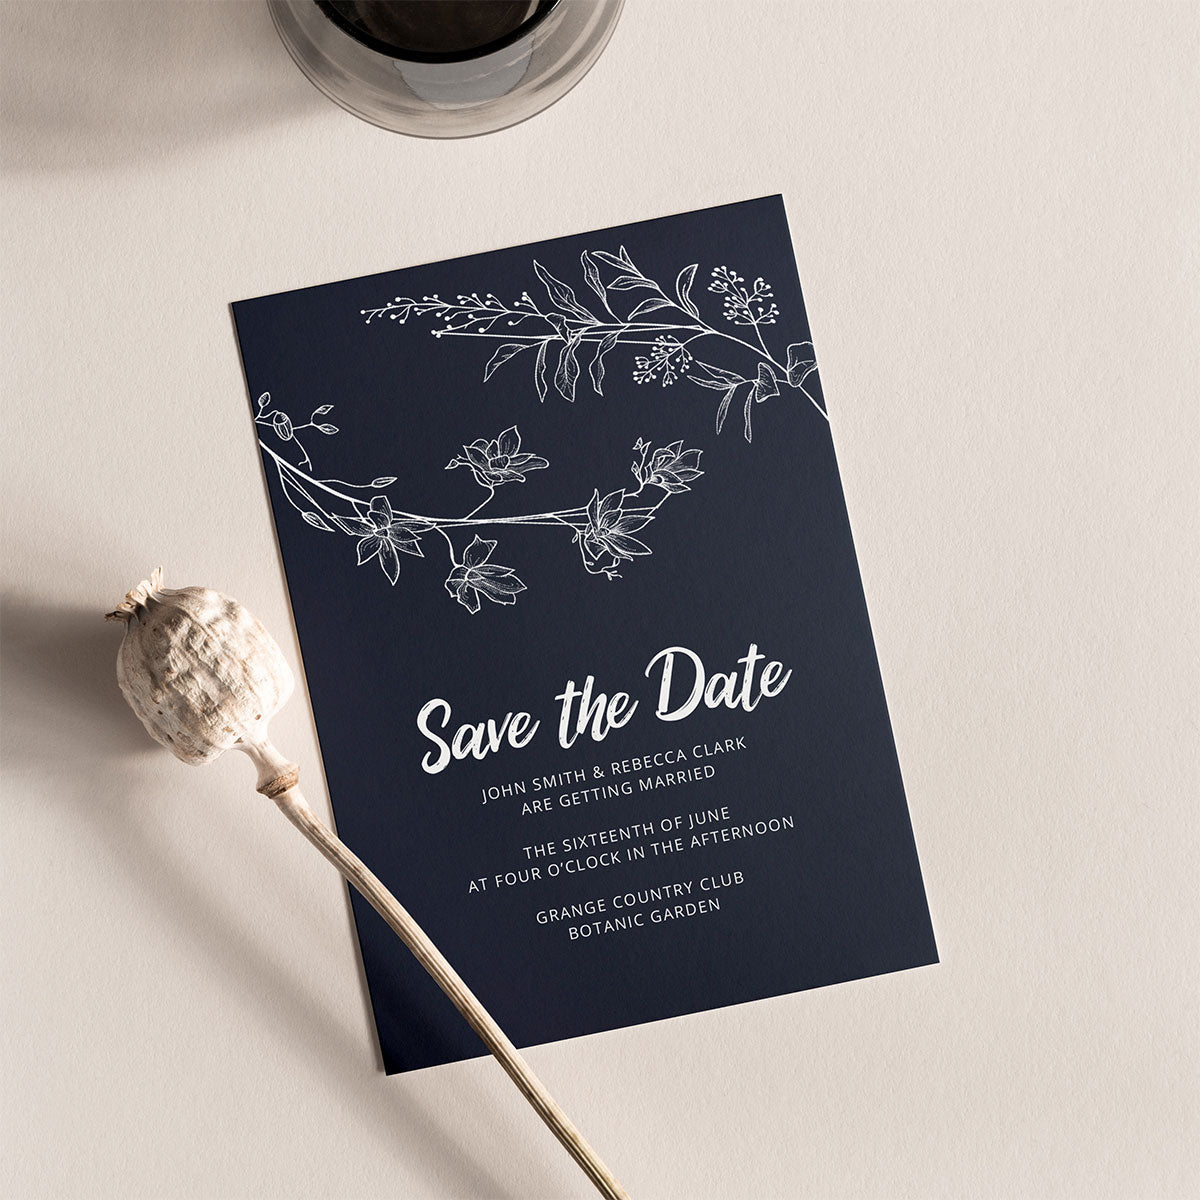 cheapest place to get invitations printed